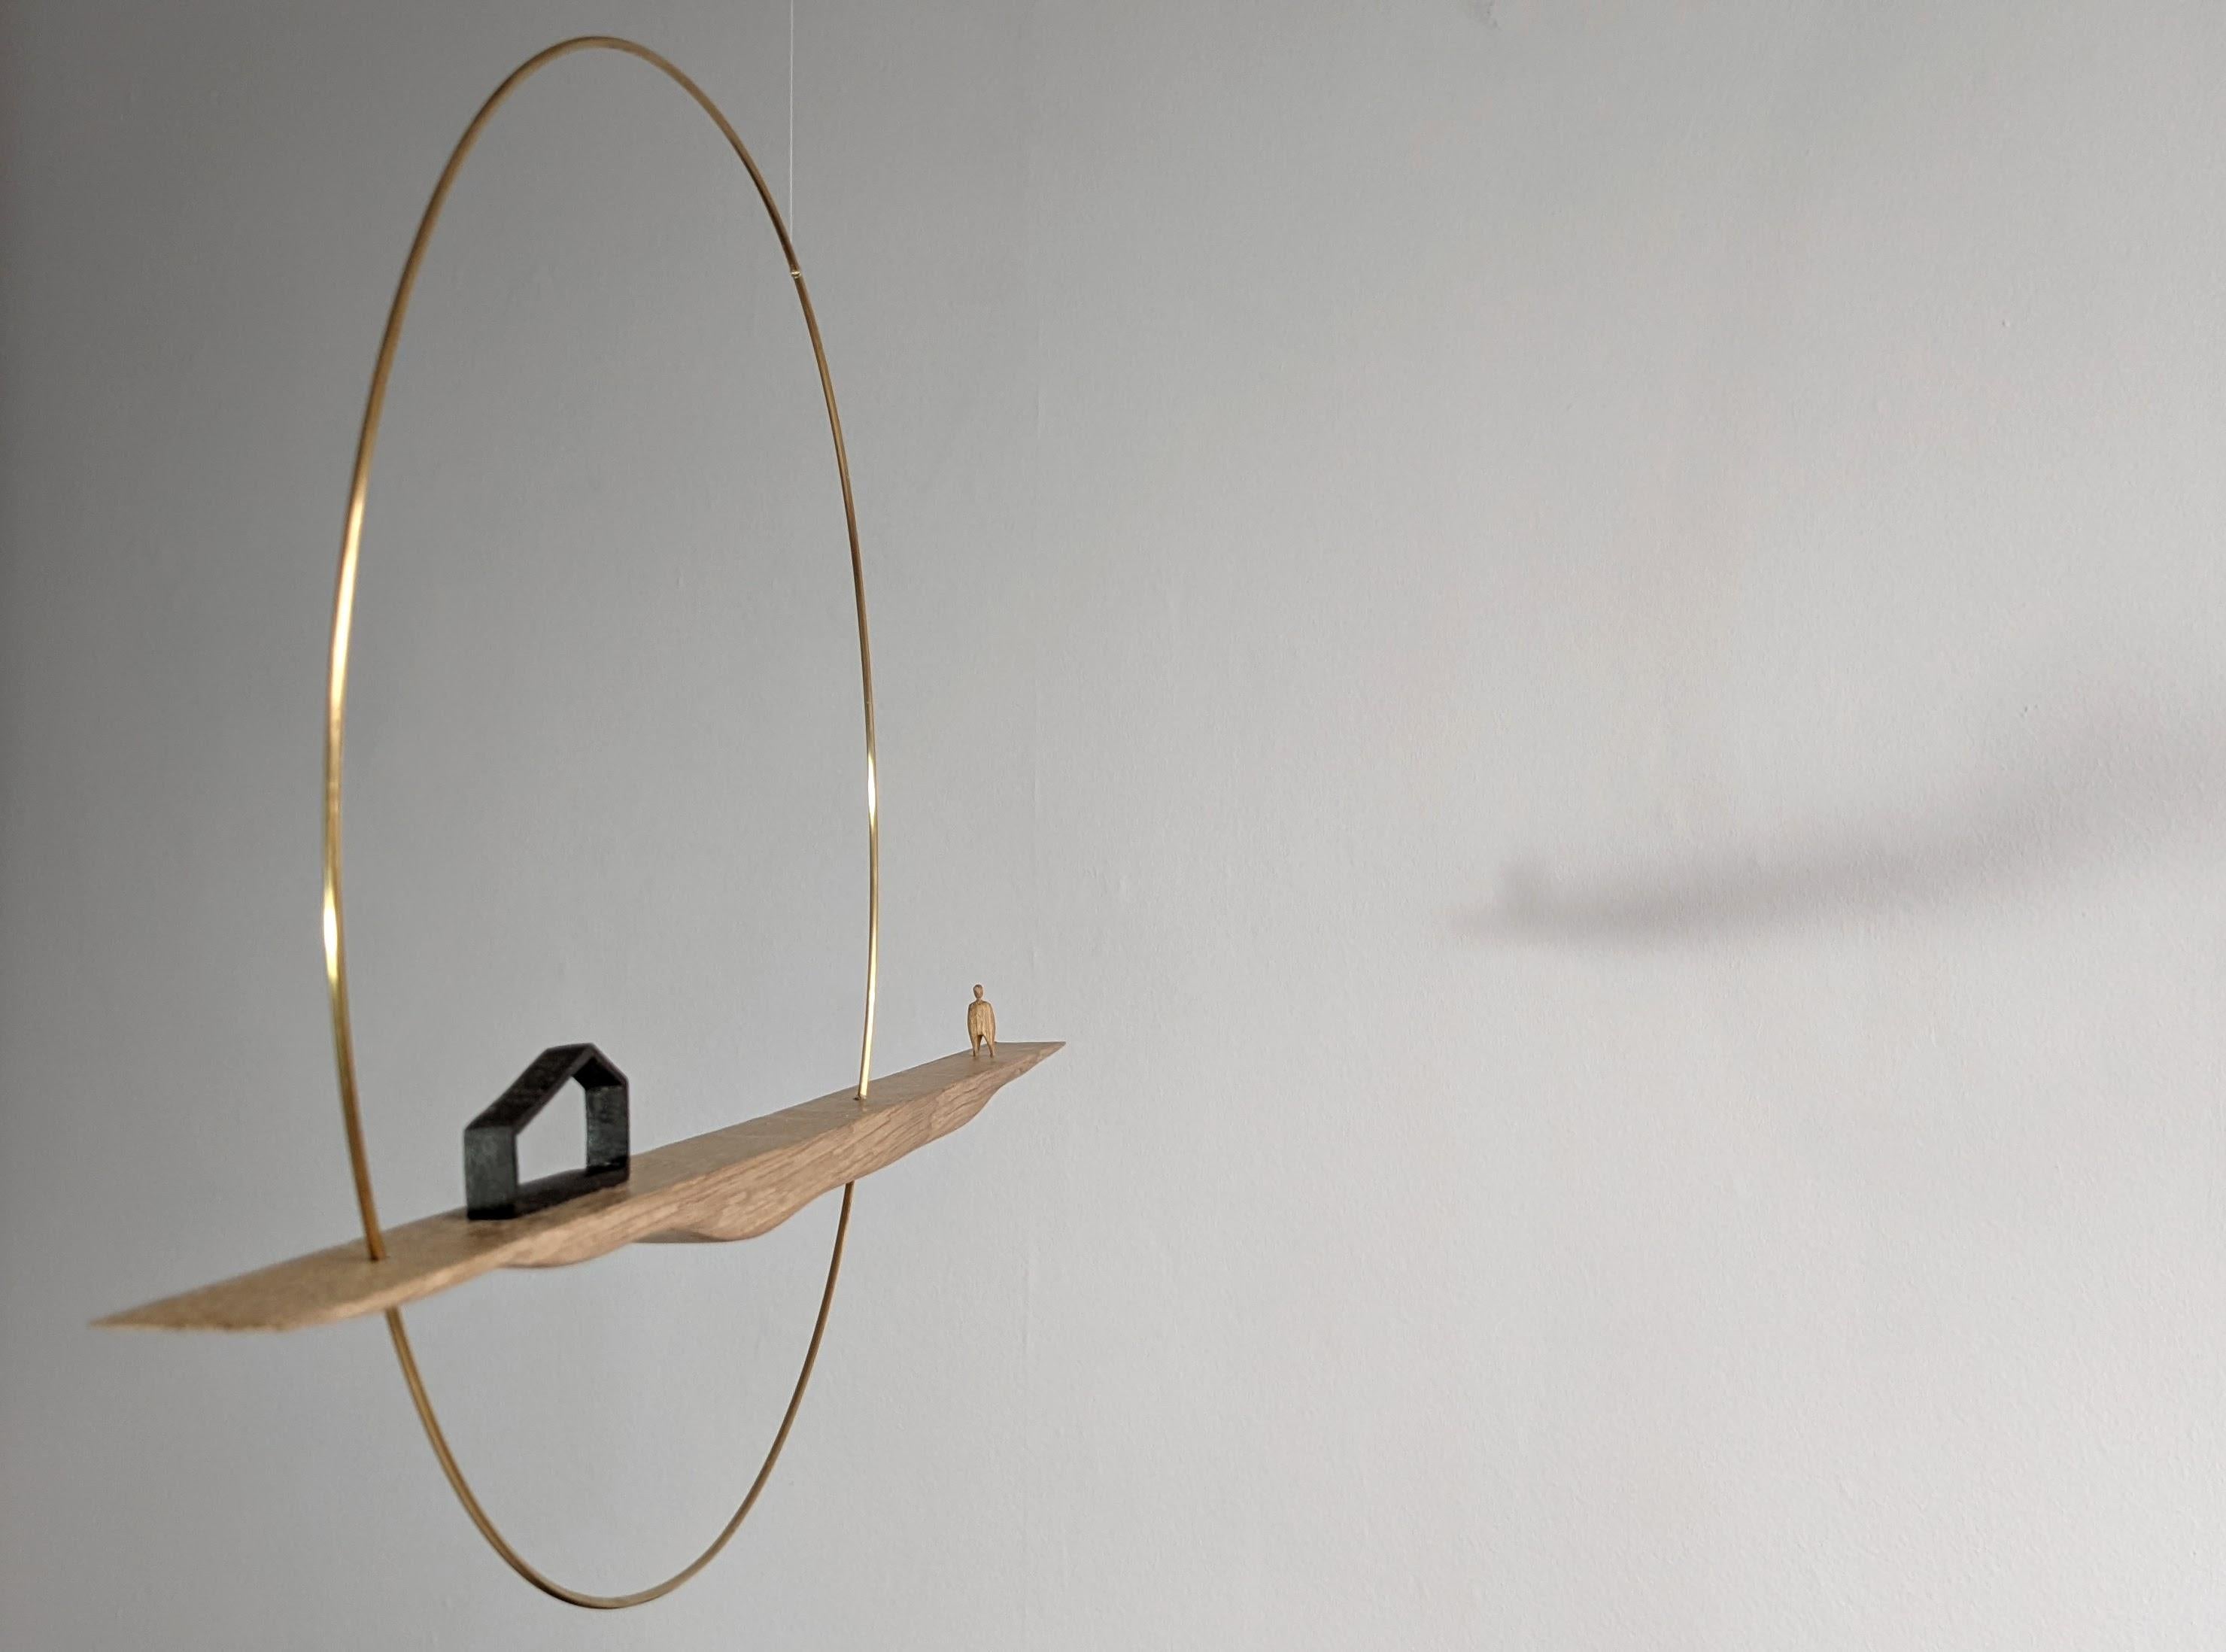 Our first collaborative series with Studio Logan Howes - HORIZON MOBILES, is a series of 'zero waste' hanging mobiles.

Utilising reworked wood offcuts from our pi collection these one of a kind sculptural mobiles have been developed to show an